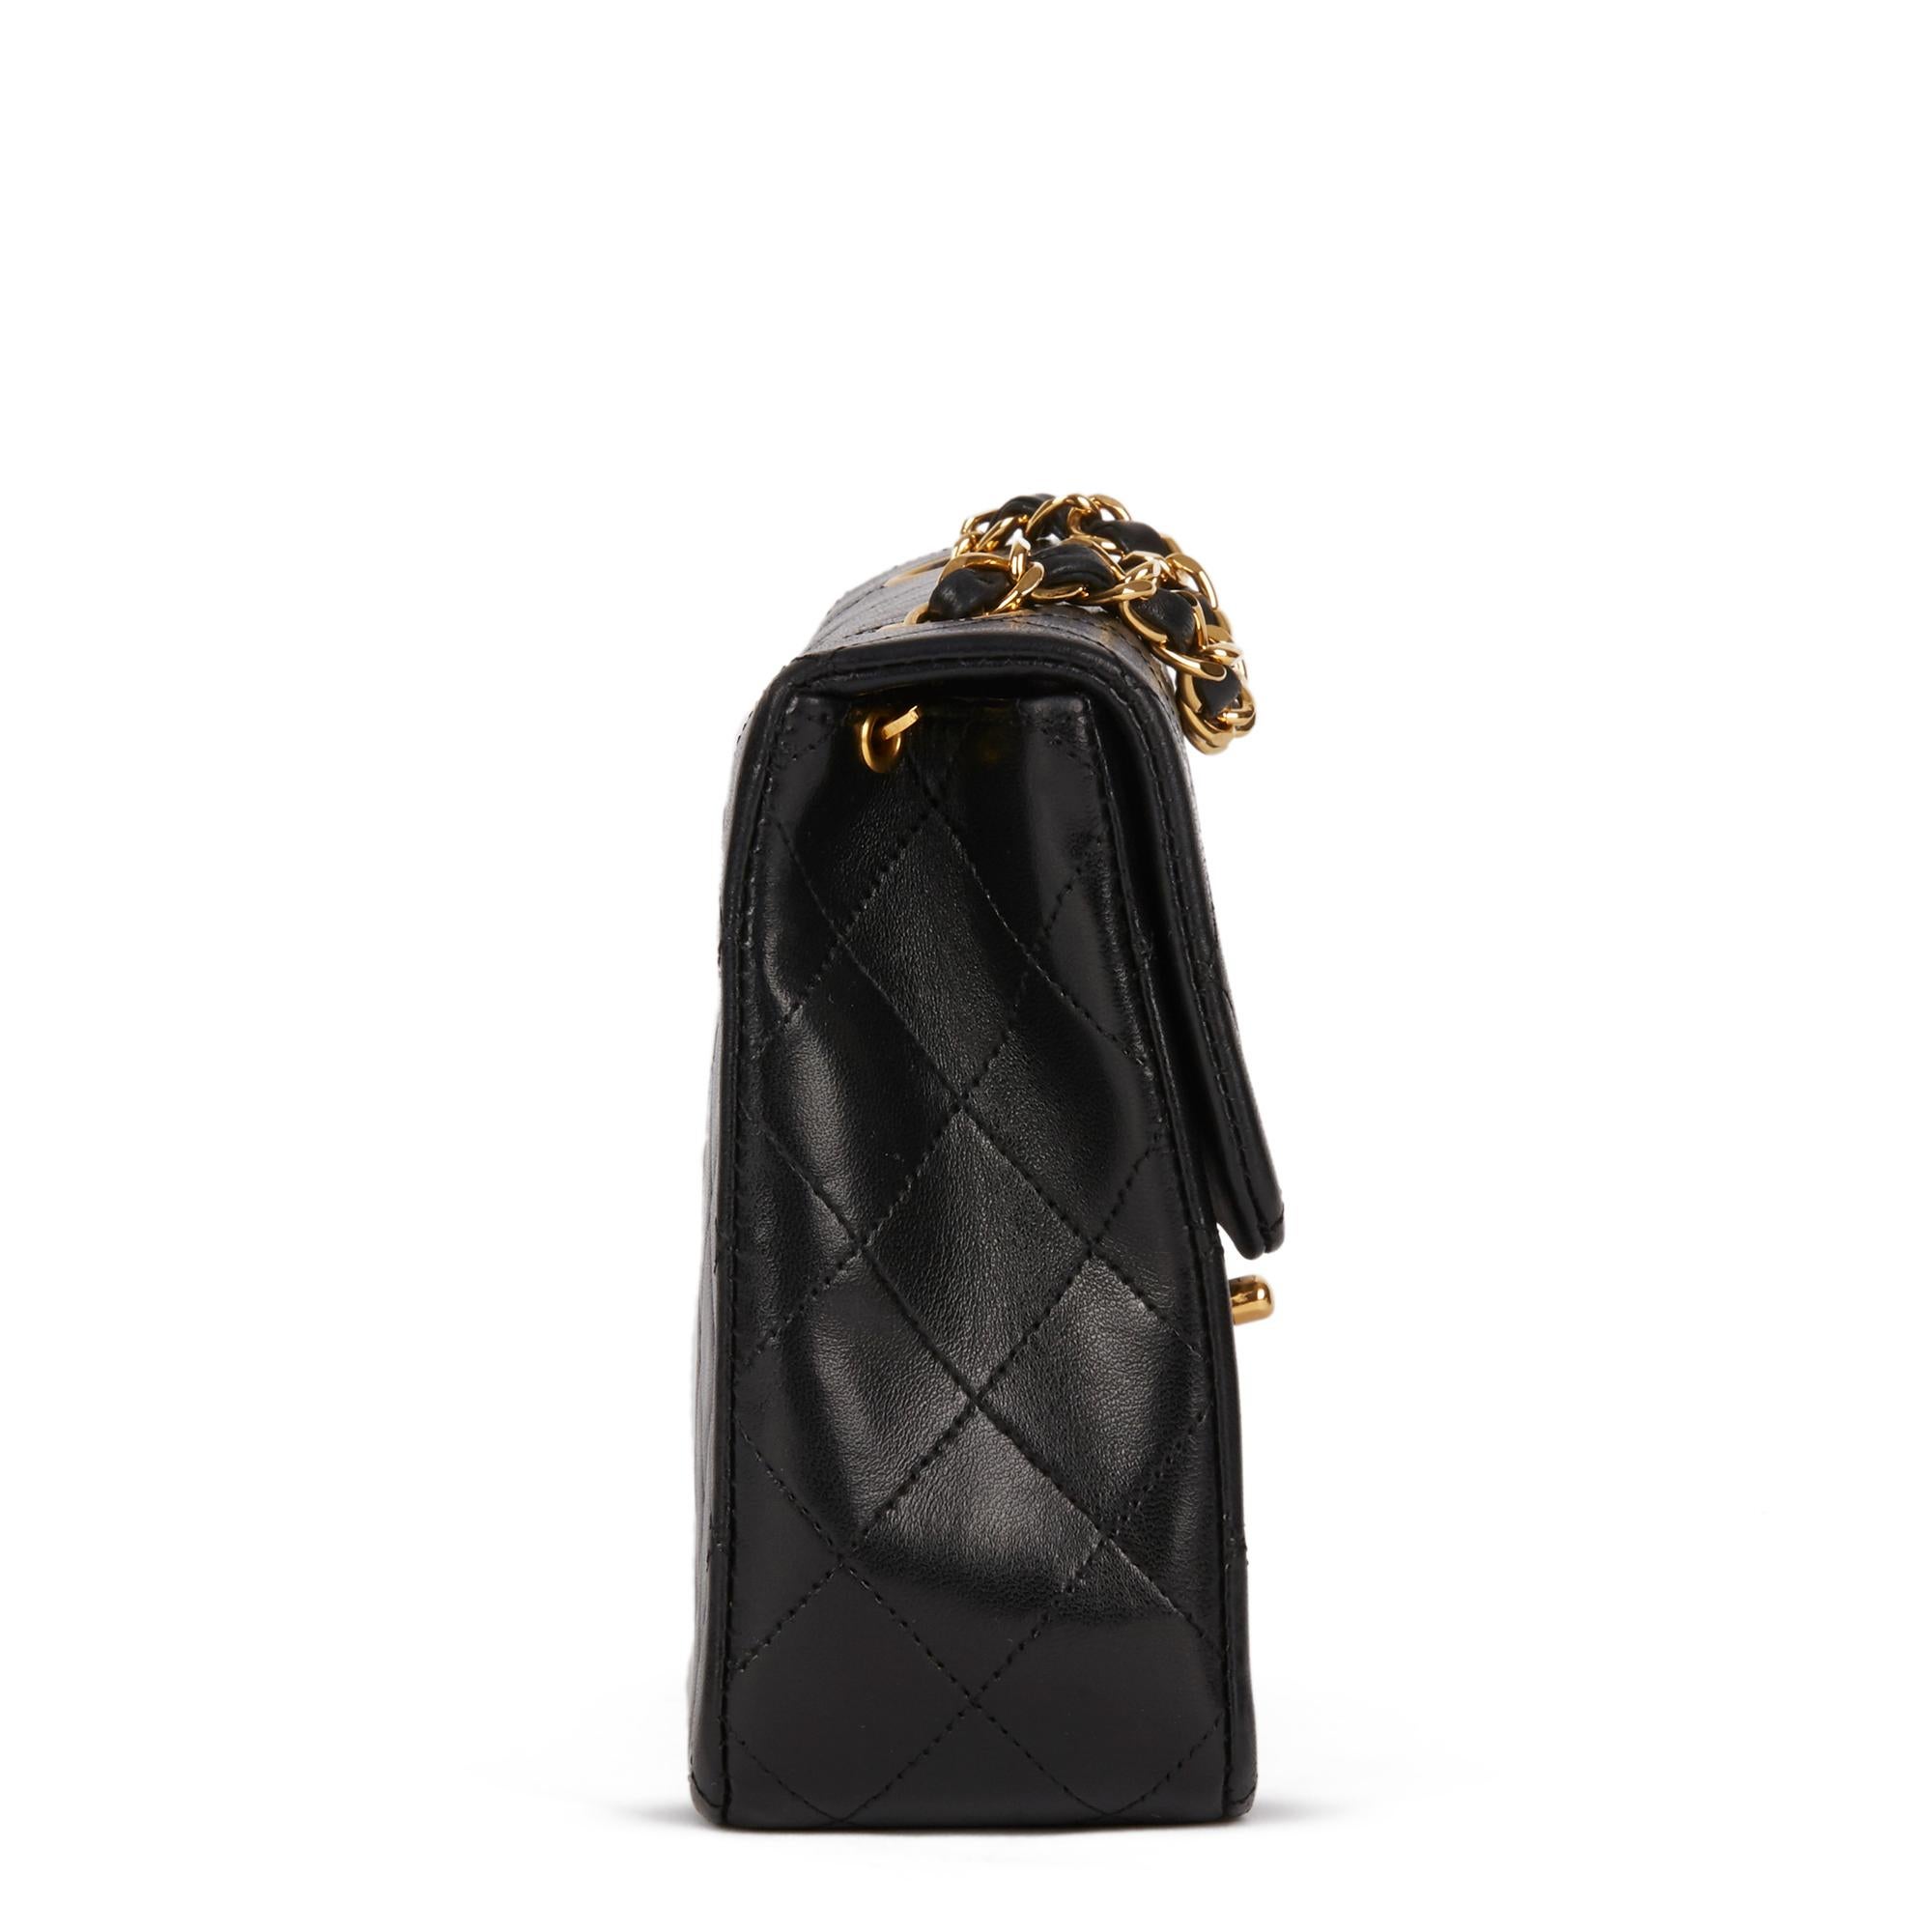 CHANEL
Black Quilted Lambskin Vintage Mini Flap Bag

Xupes Reference: HB2934
Serial Number: 1361591
Age (Circa): 1989
Accompanied By: Chanel Dust Bag, Box
Authenticity Details: Serial Sticker (Made in France)
Gender: Ladies
Type: Shoulder,